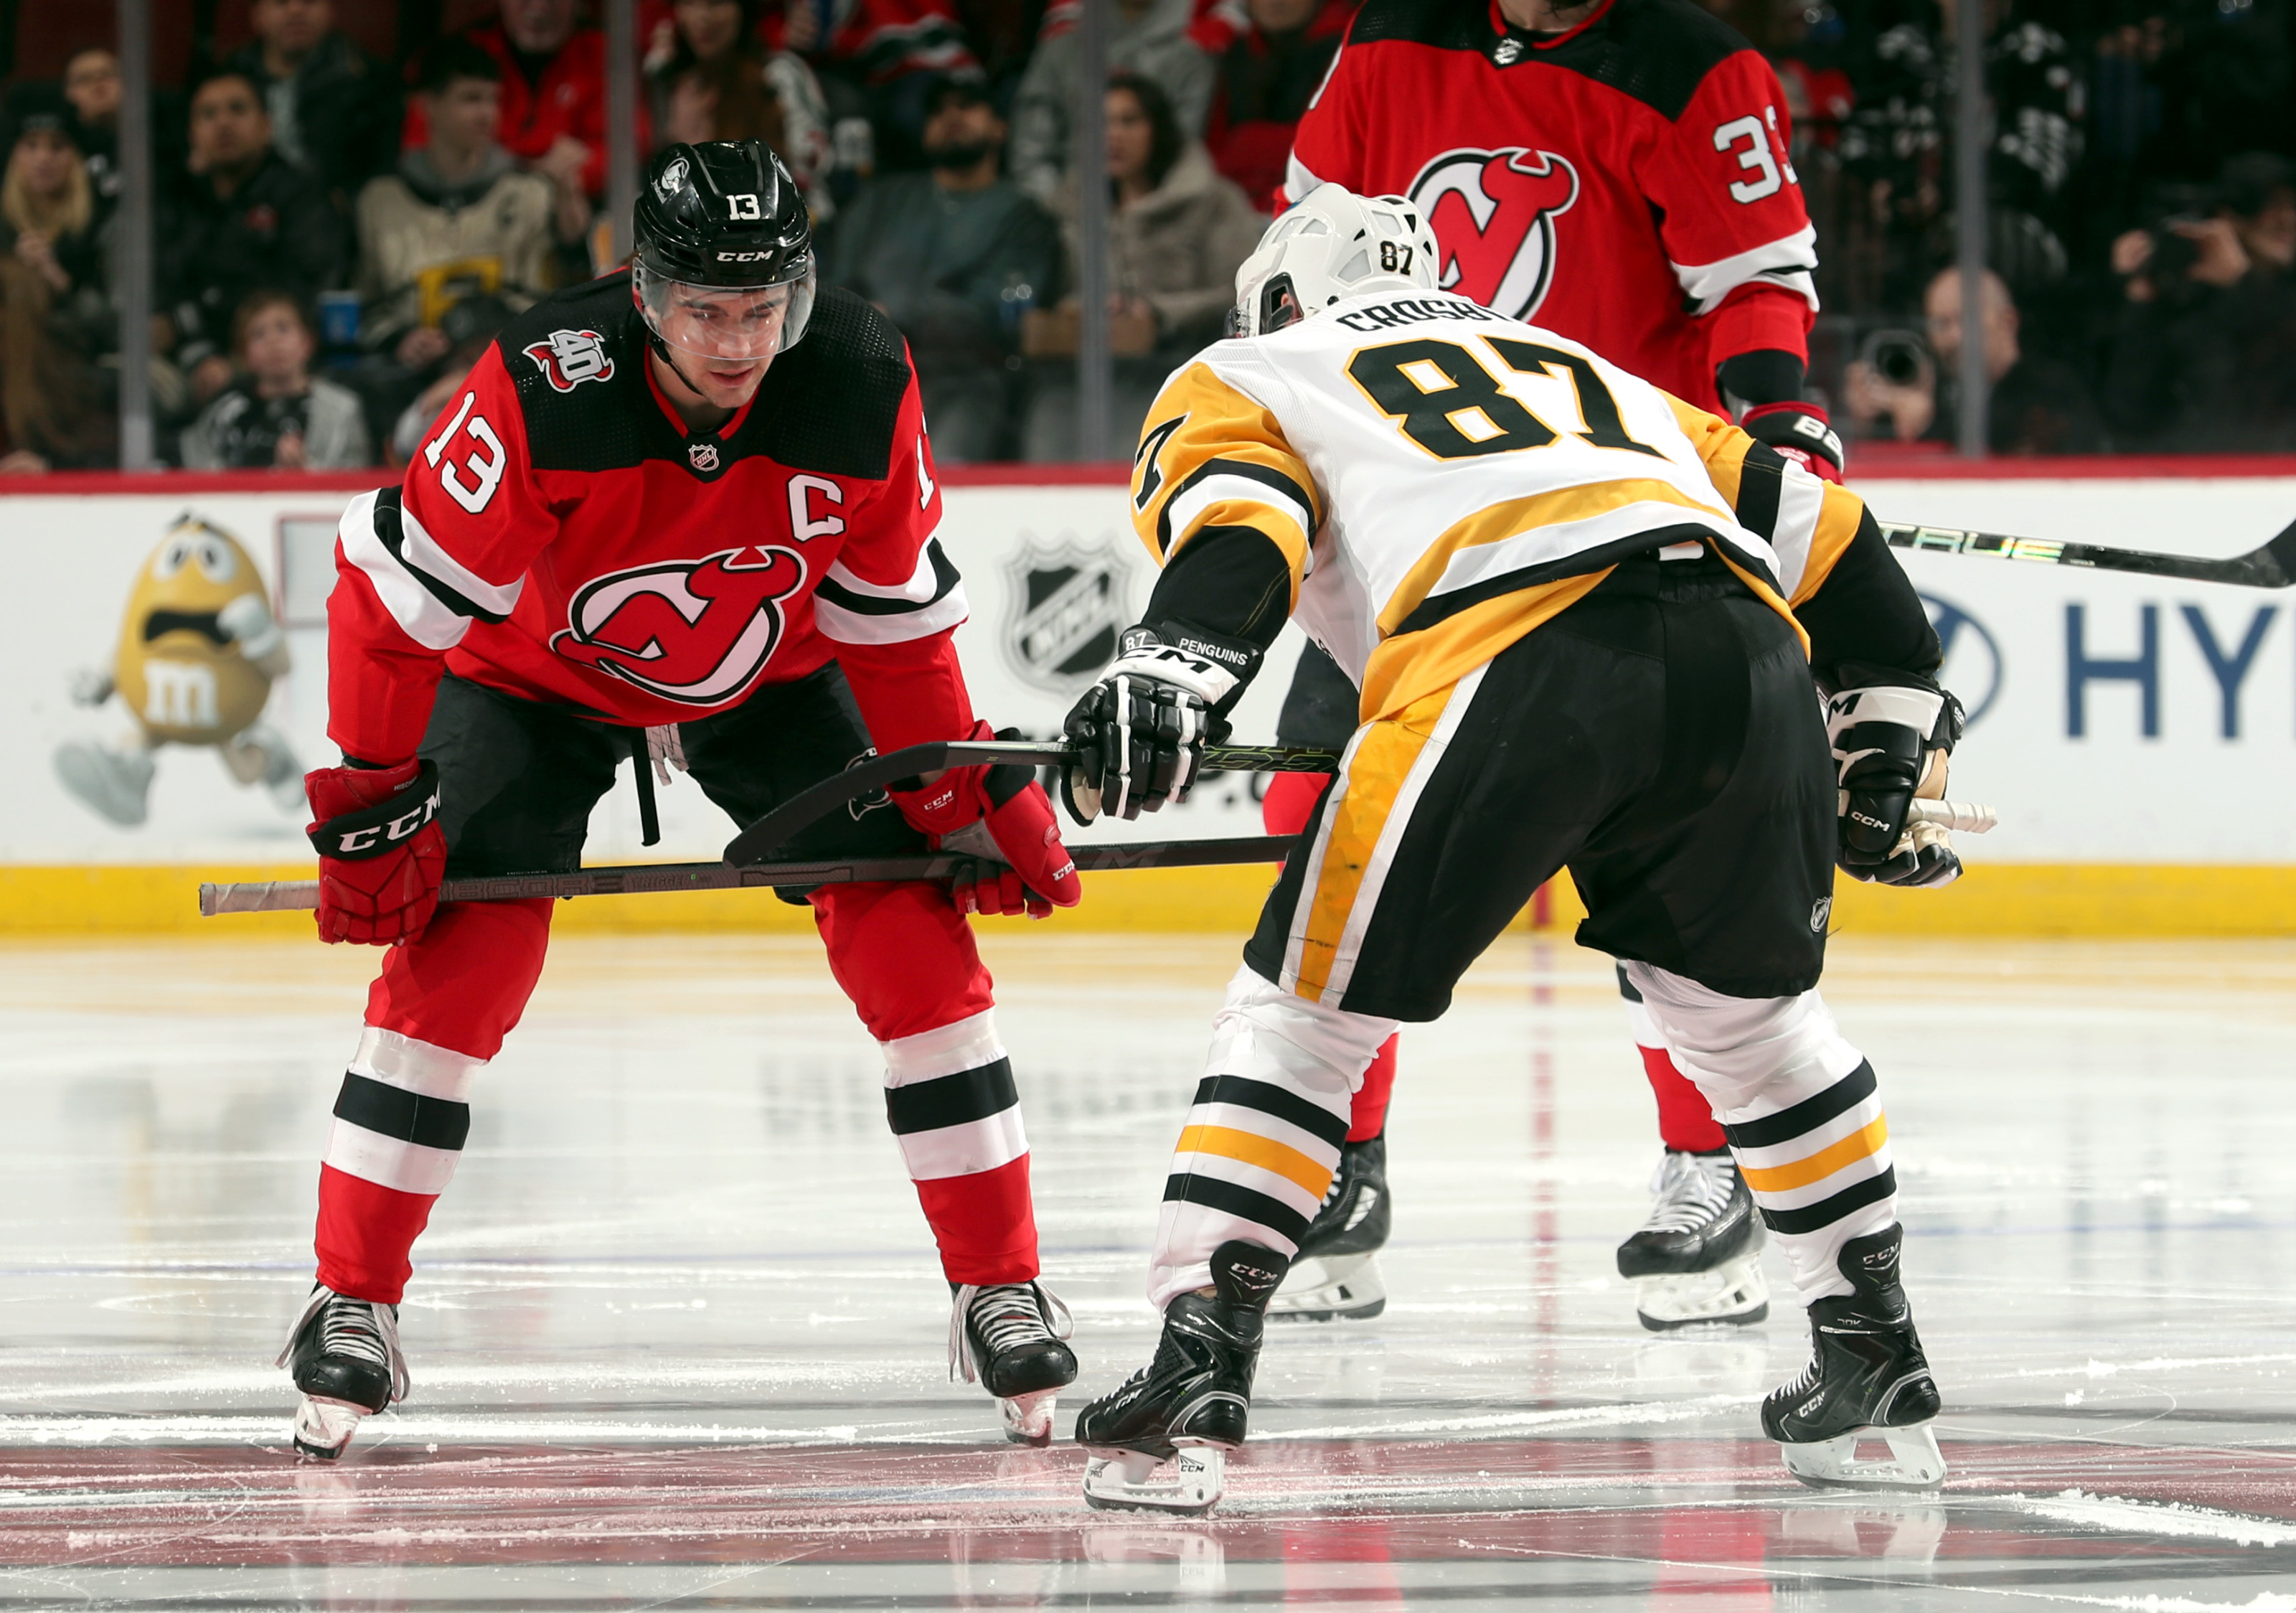 NHL Predictions: January 22 with Penguins vs Devils